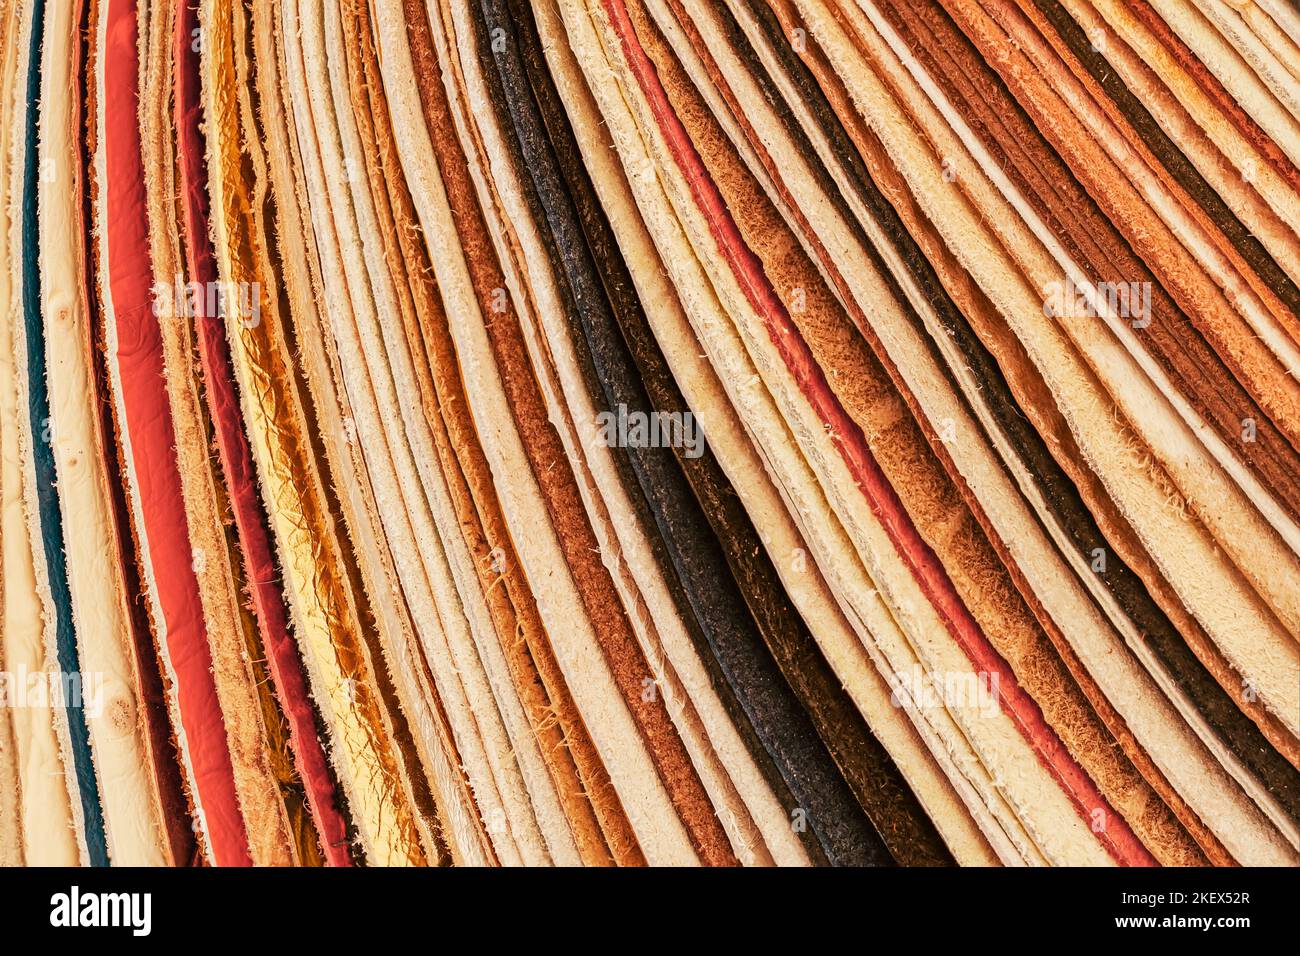 Abstract background of multicolored leather catalog, variation, choice of different colors Stock Photo